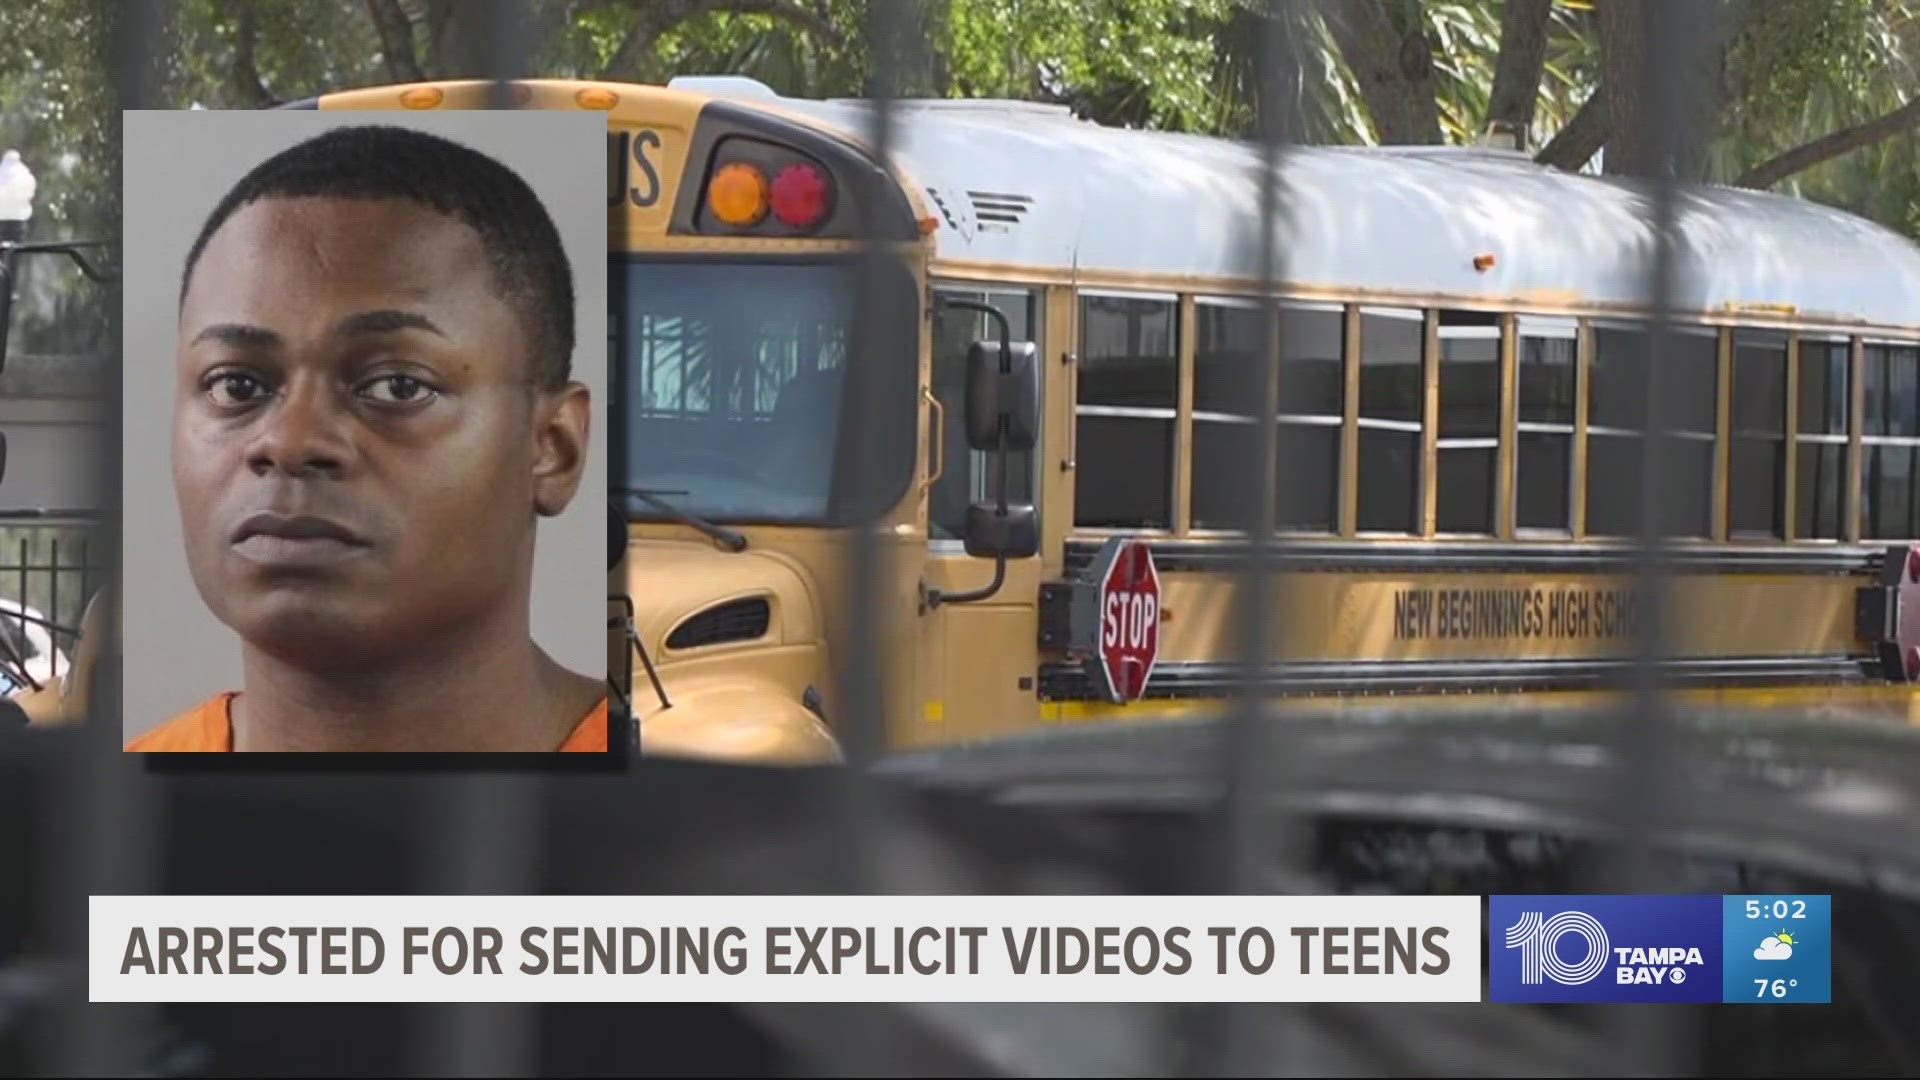 Jerron Dunn asked at least one student to come to his house, the sheriff's office said.